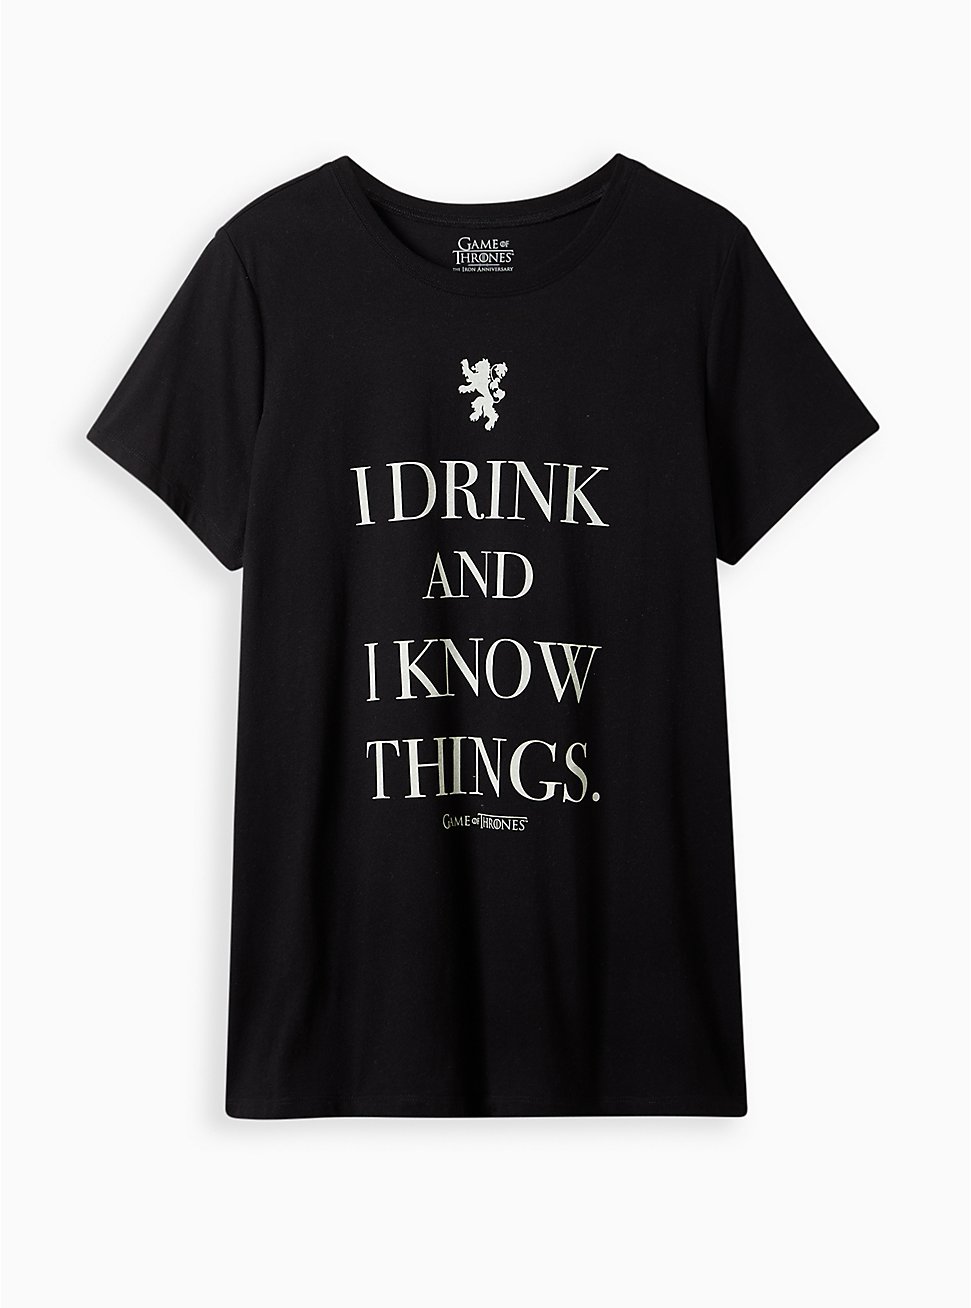 Plus Size Classic Fit Crew Tee - Game of Thrones I Drink And I Know Black, DEEP BLACK, hi-res